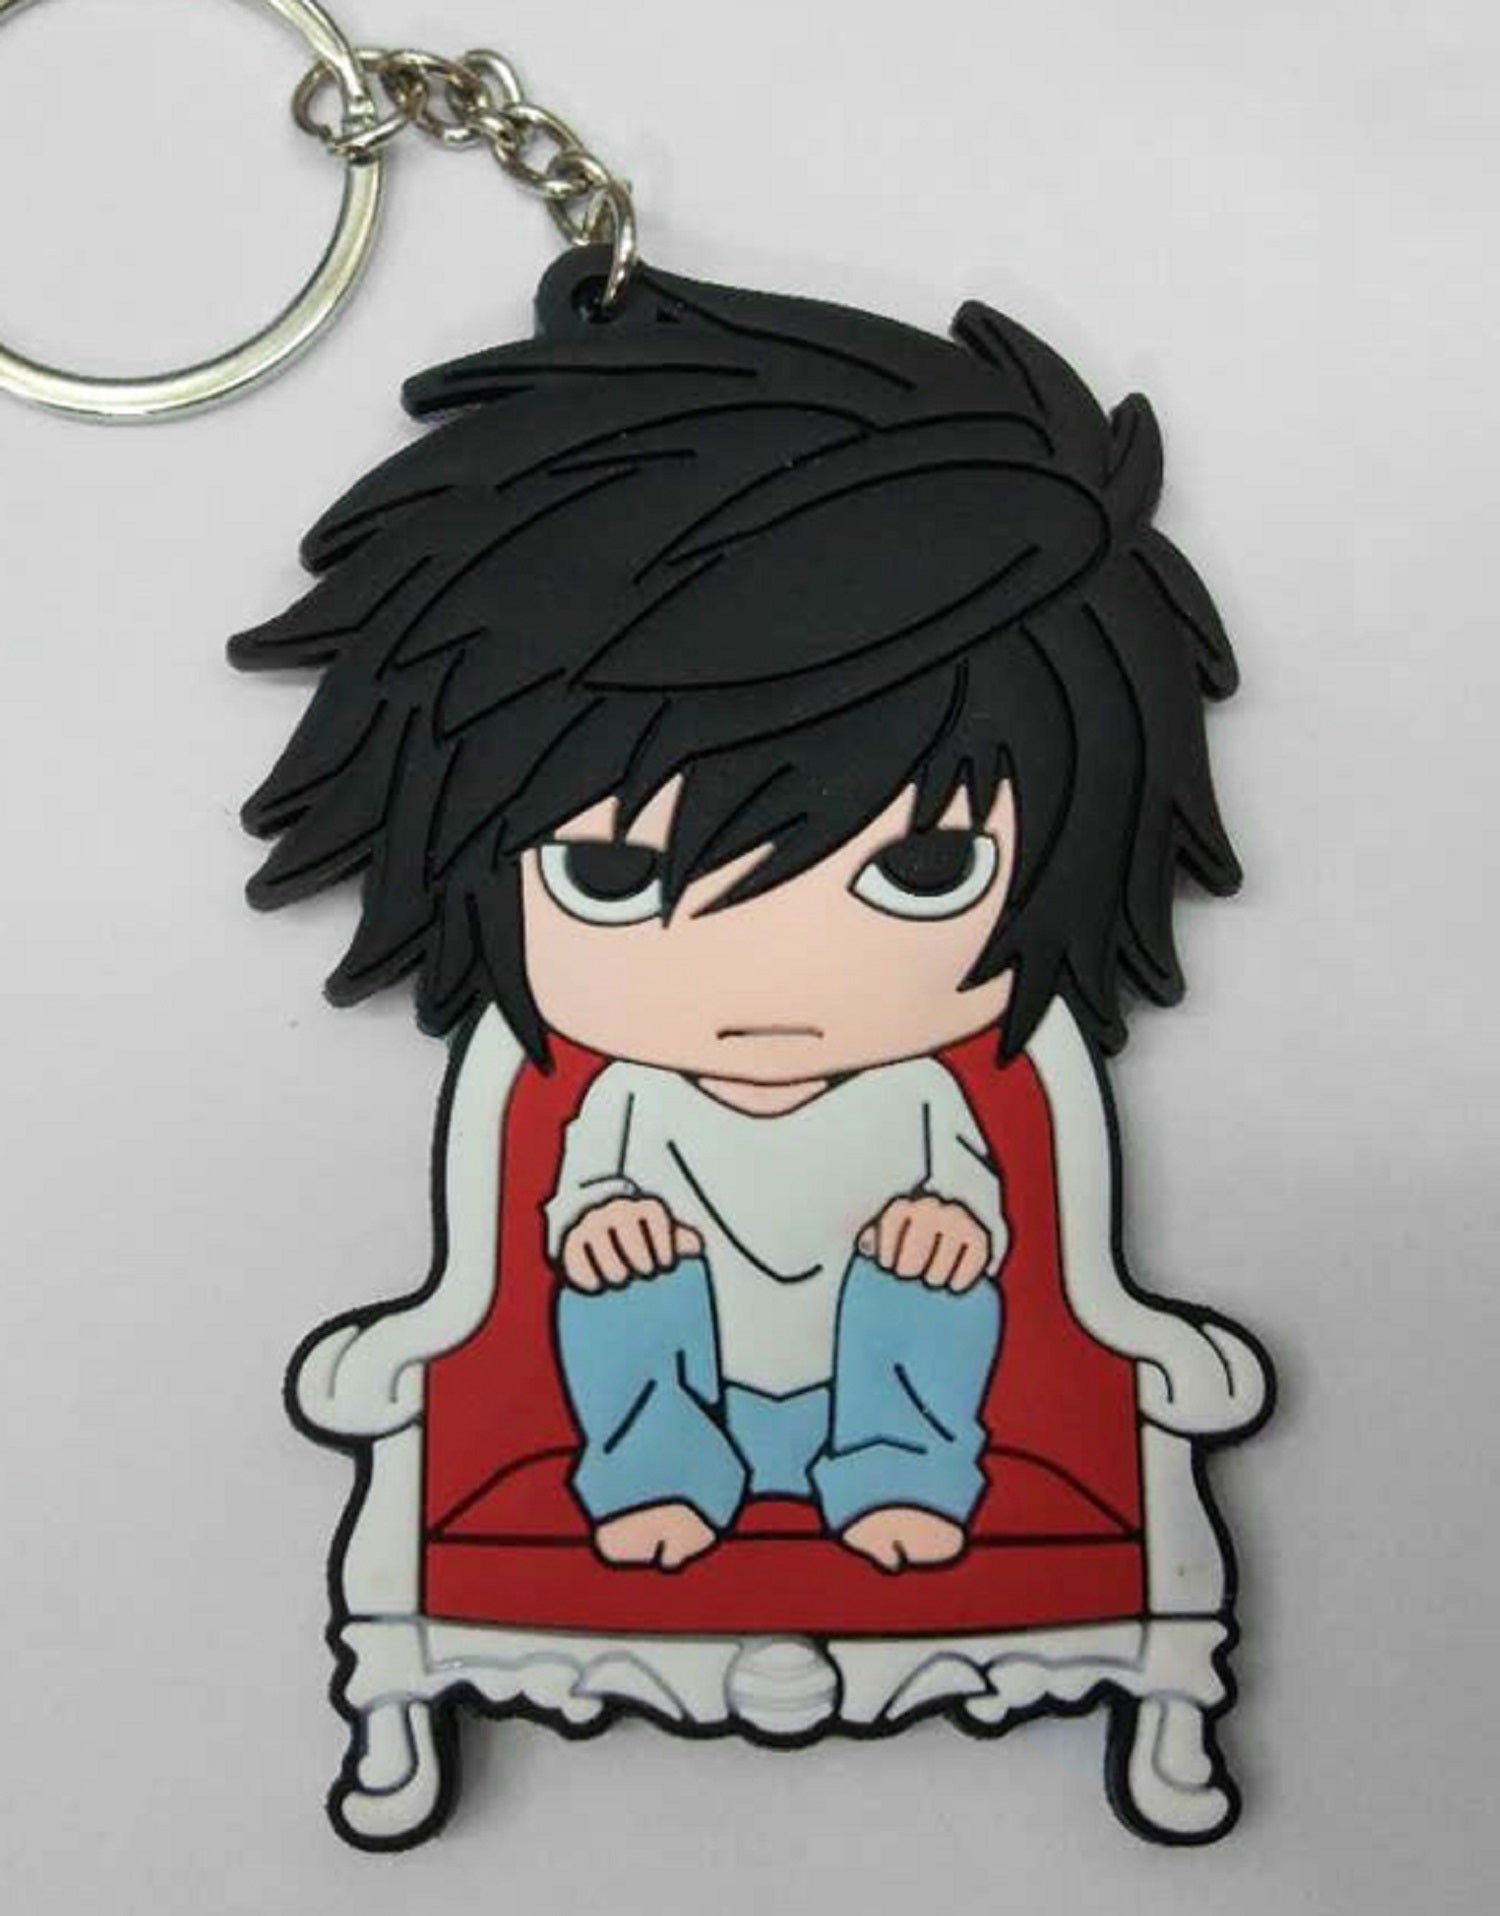 Death Note L Keychain - Super Anime Store FREE SHIPPING FAST SHIPPING USA